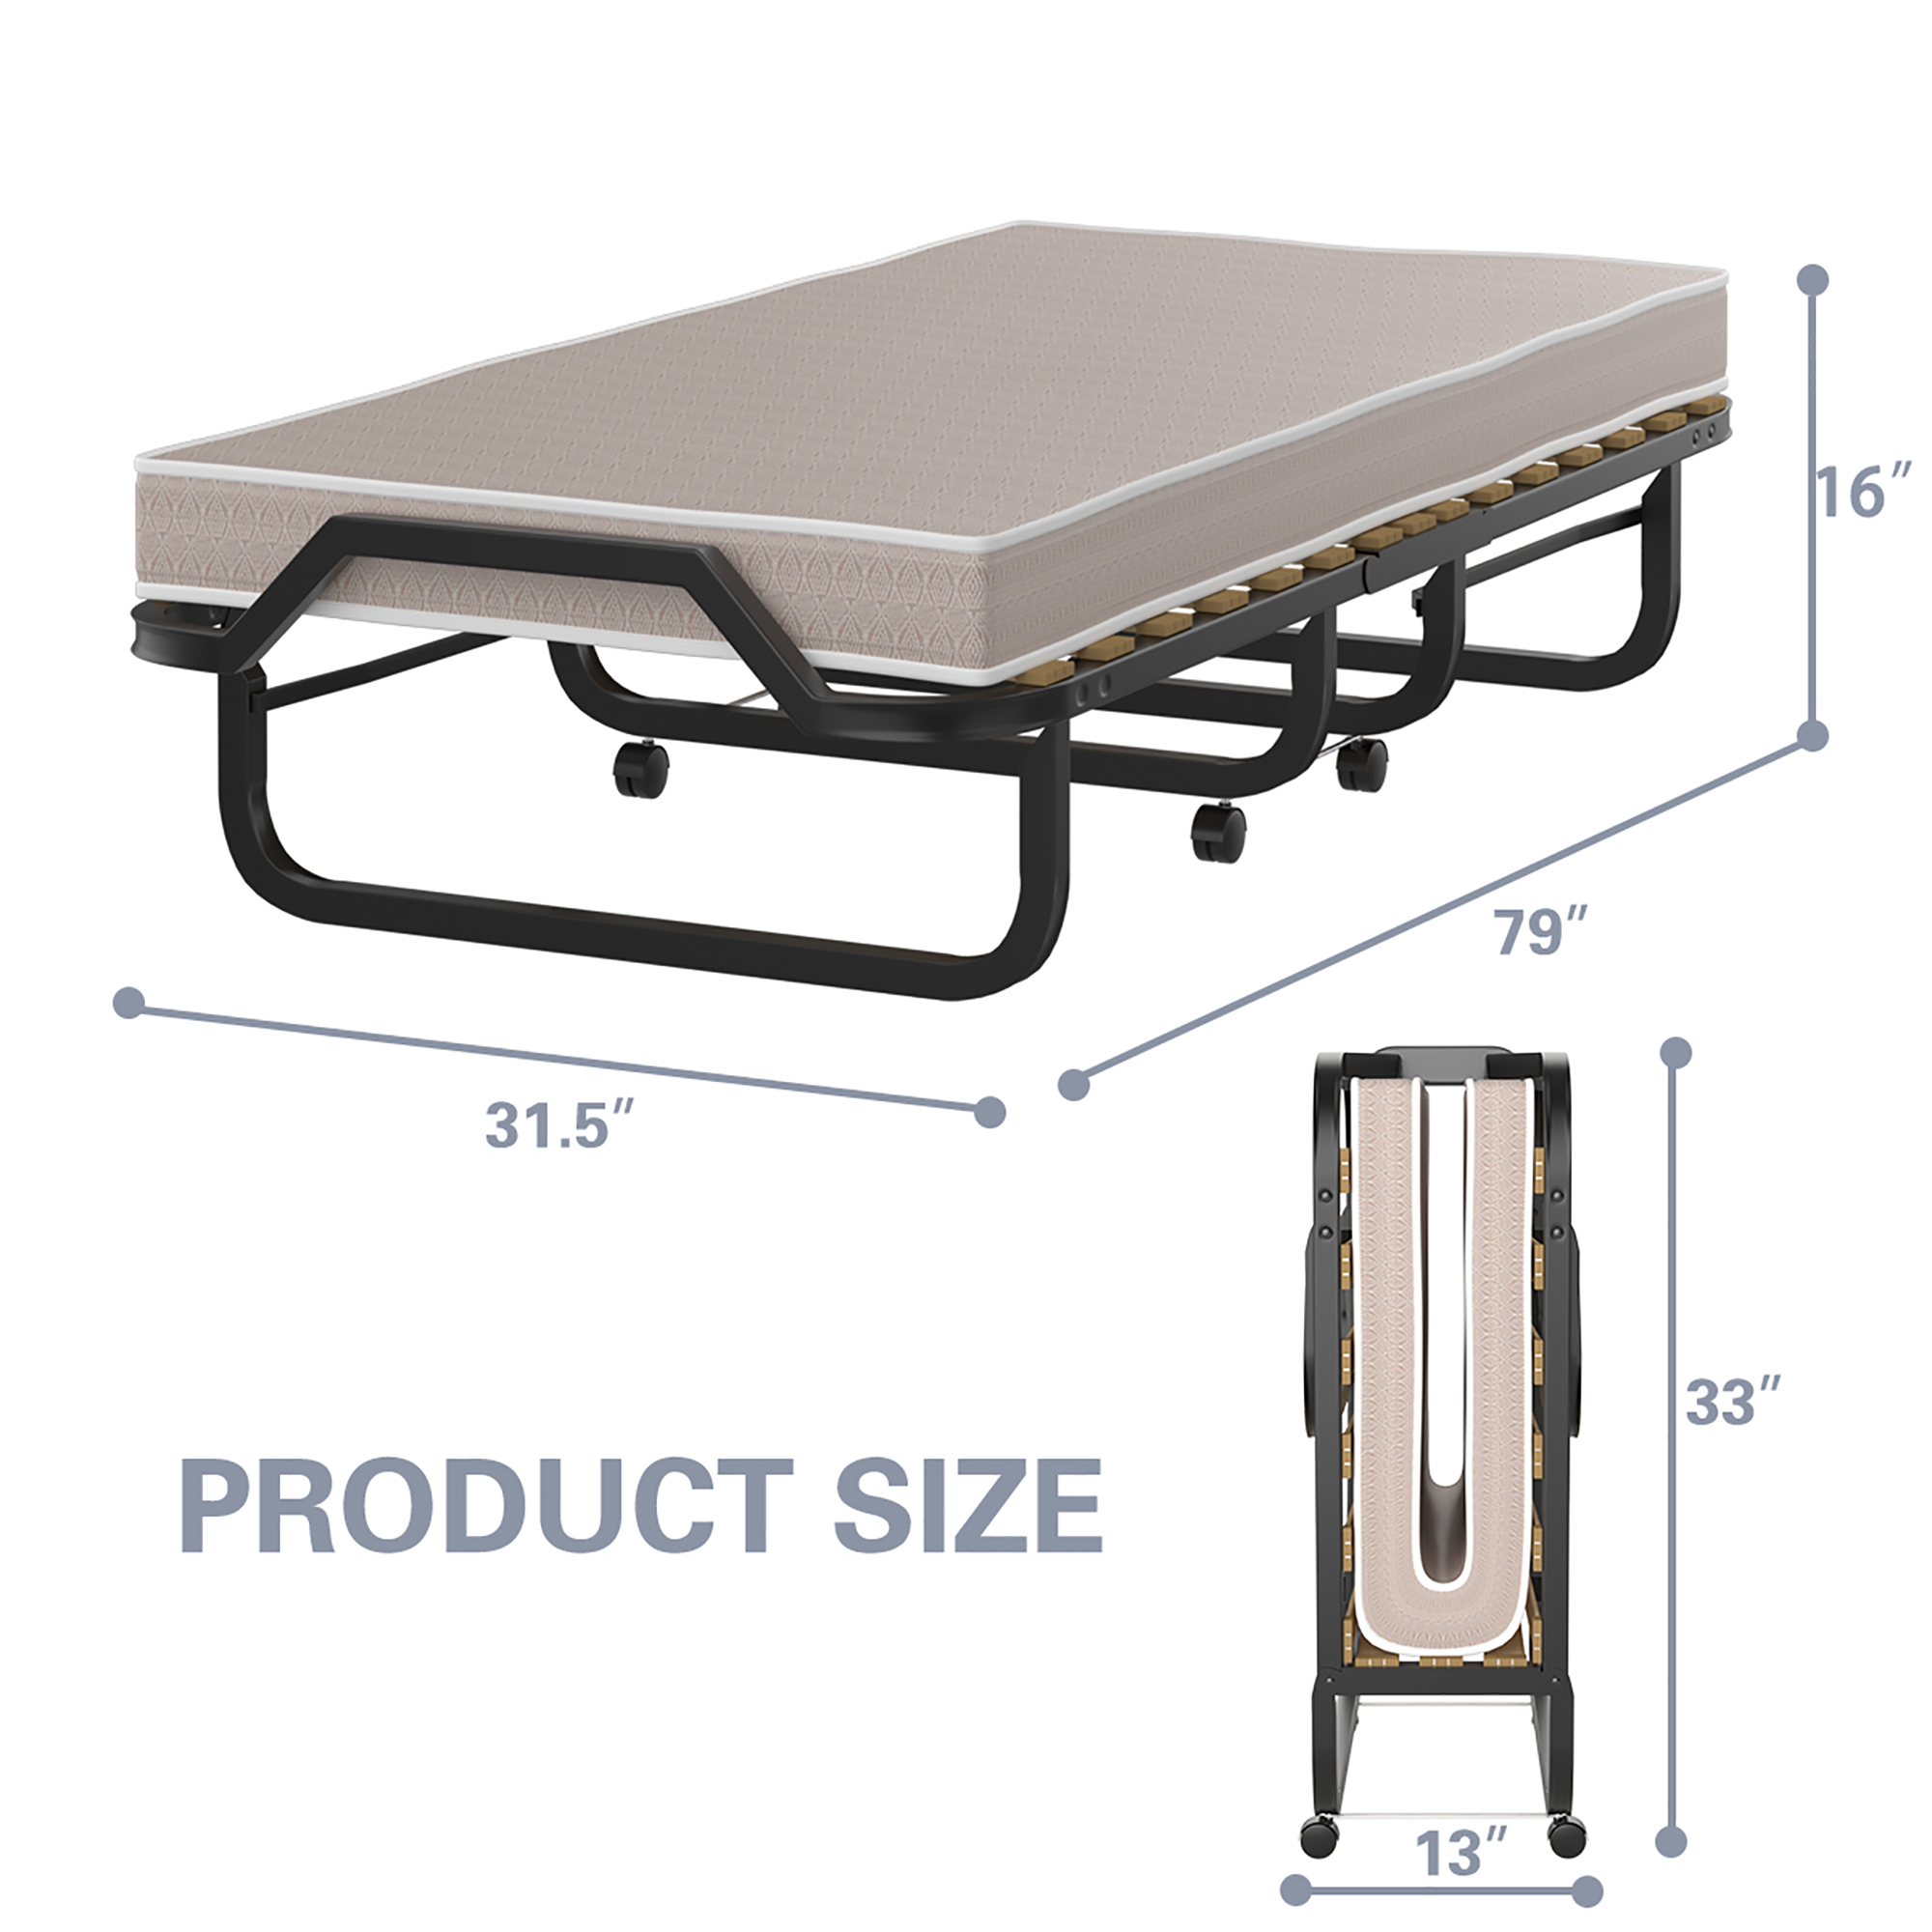 Gymax Folding Bed w/ Memory Foam Mattress Rollaway Metal Guest Bed Sleeper Made in Italy - image 2 of 10